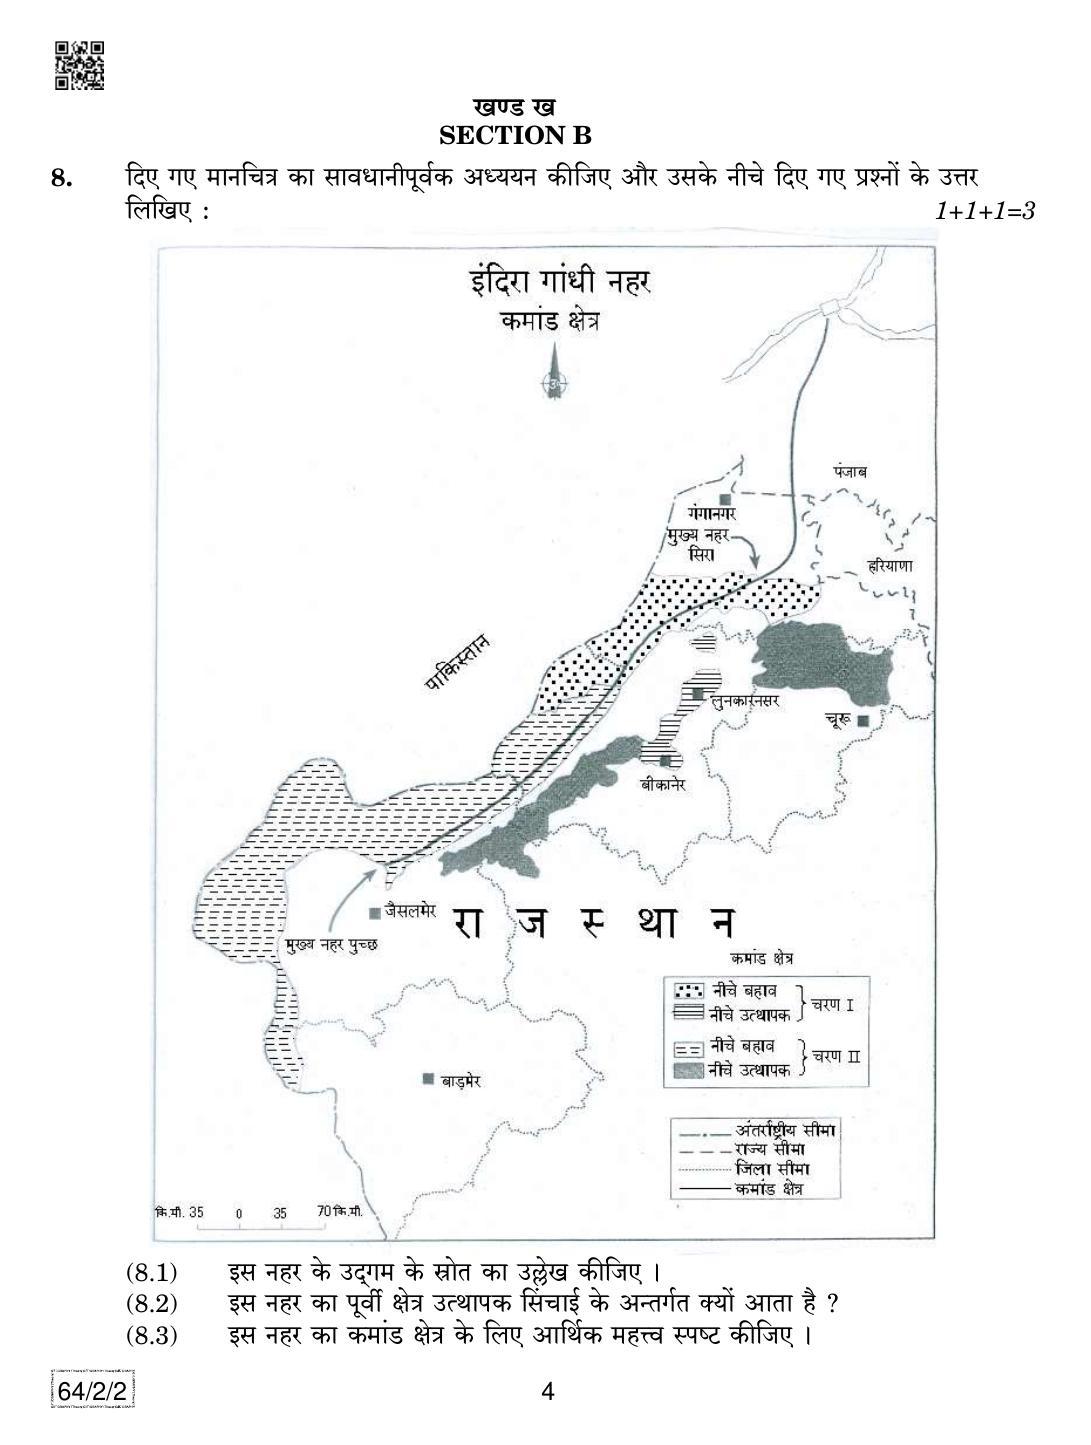 CBSE Class 12 64-2-2 Geography 2019 Question Paper - Page 4